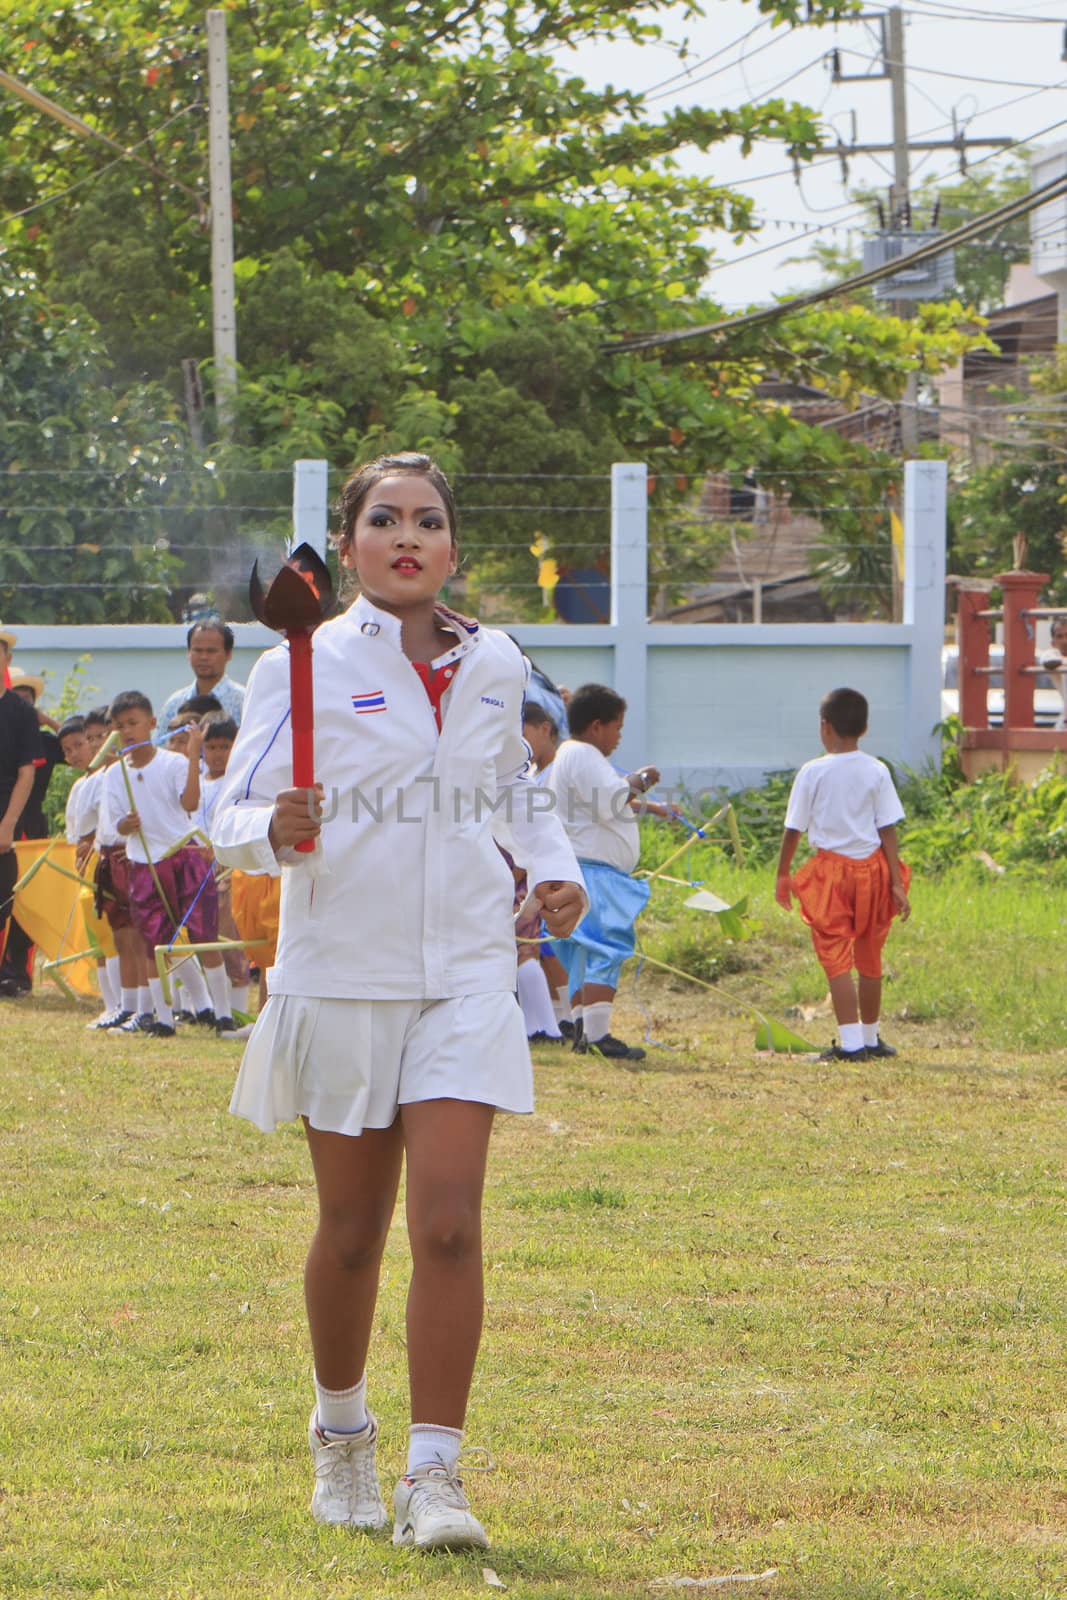 THAILAND - JULY 13: Miss Pirada Suwannarak tennis player champion carries the Torch during Dokbual game school parade on July 13, 2012 in Suratthanee, Thailand.